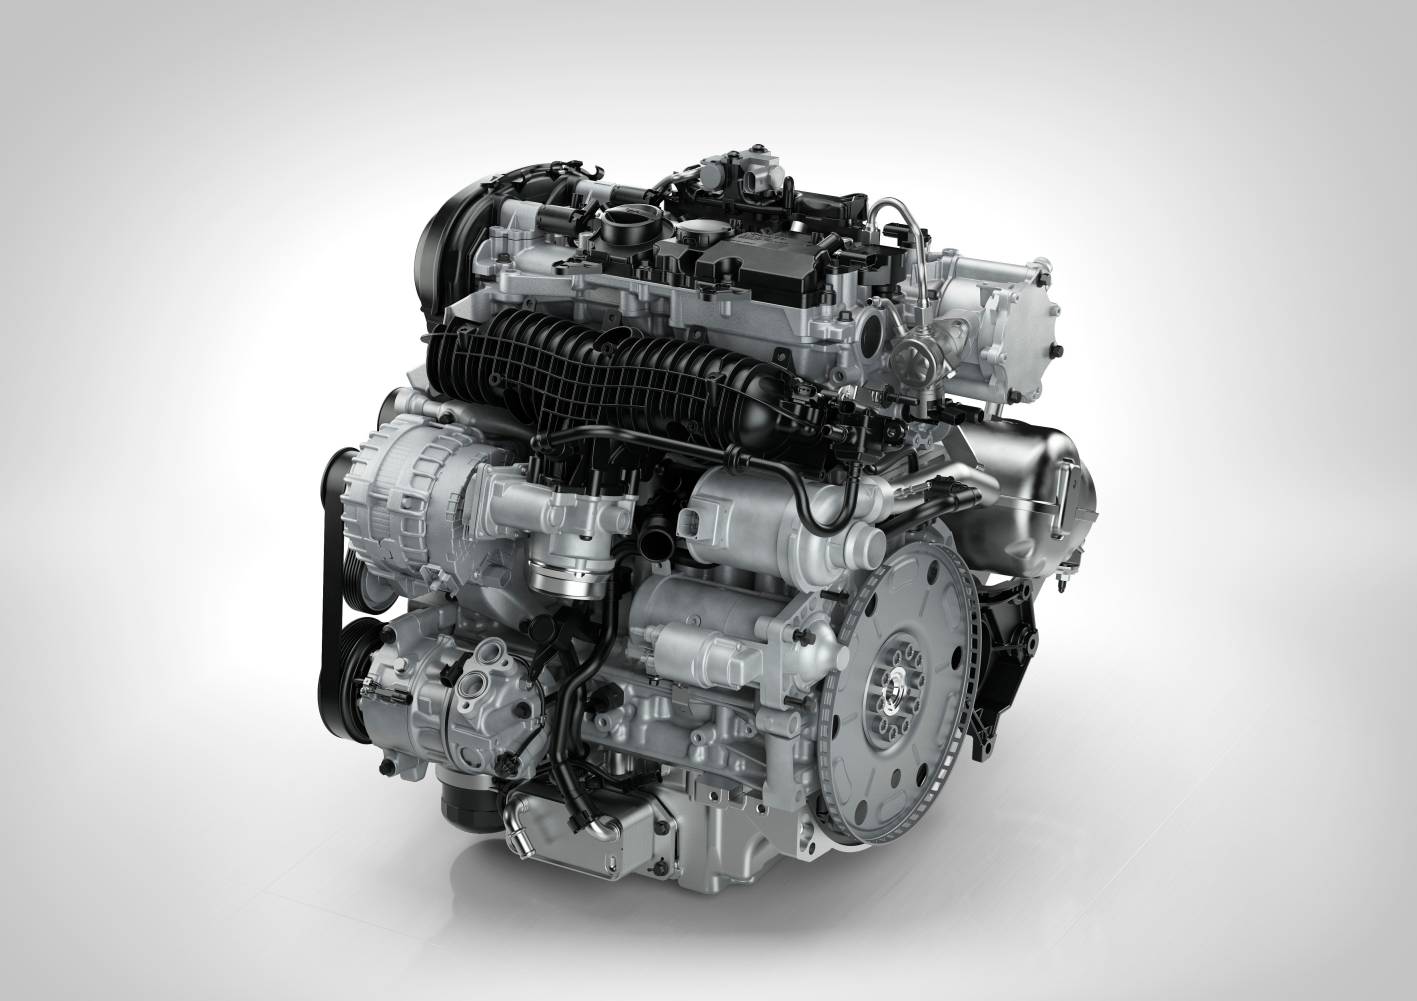 Volvo introduces new ‘Drive-E’ T5, D4 engines & eight-speed auto